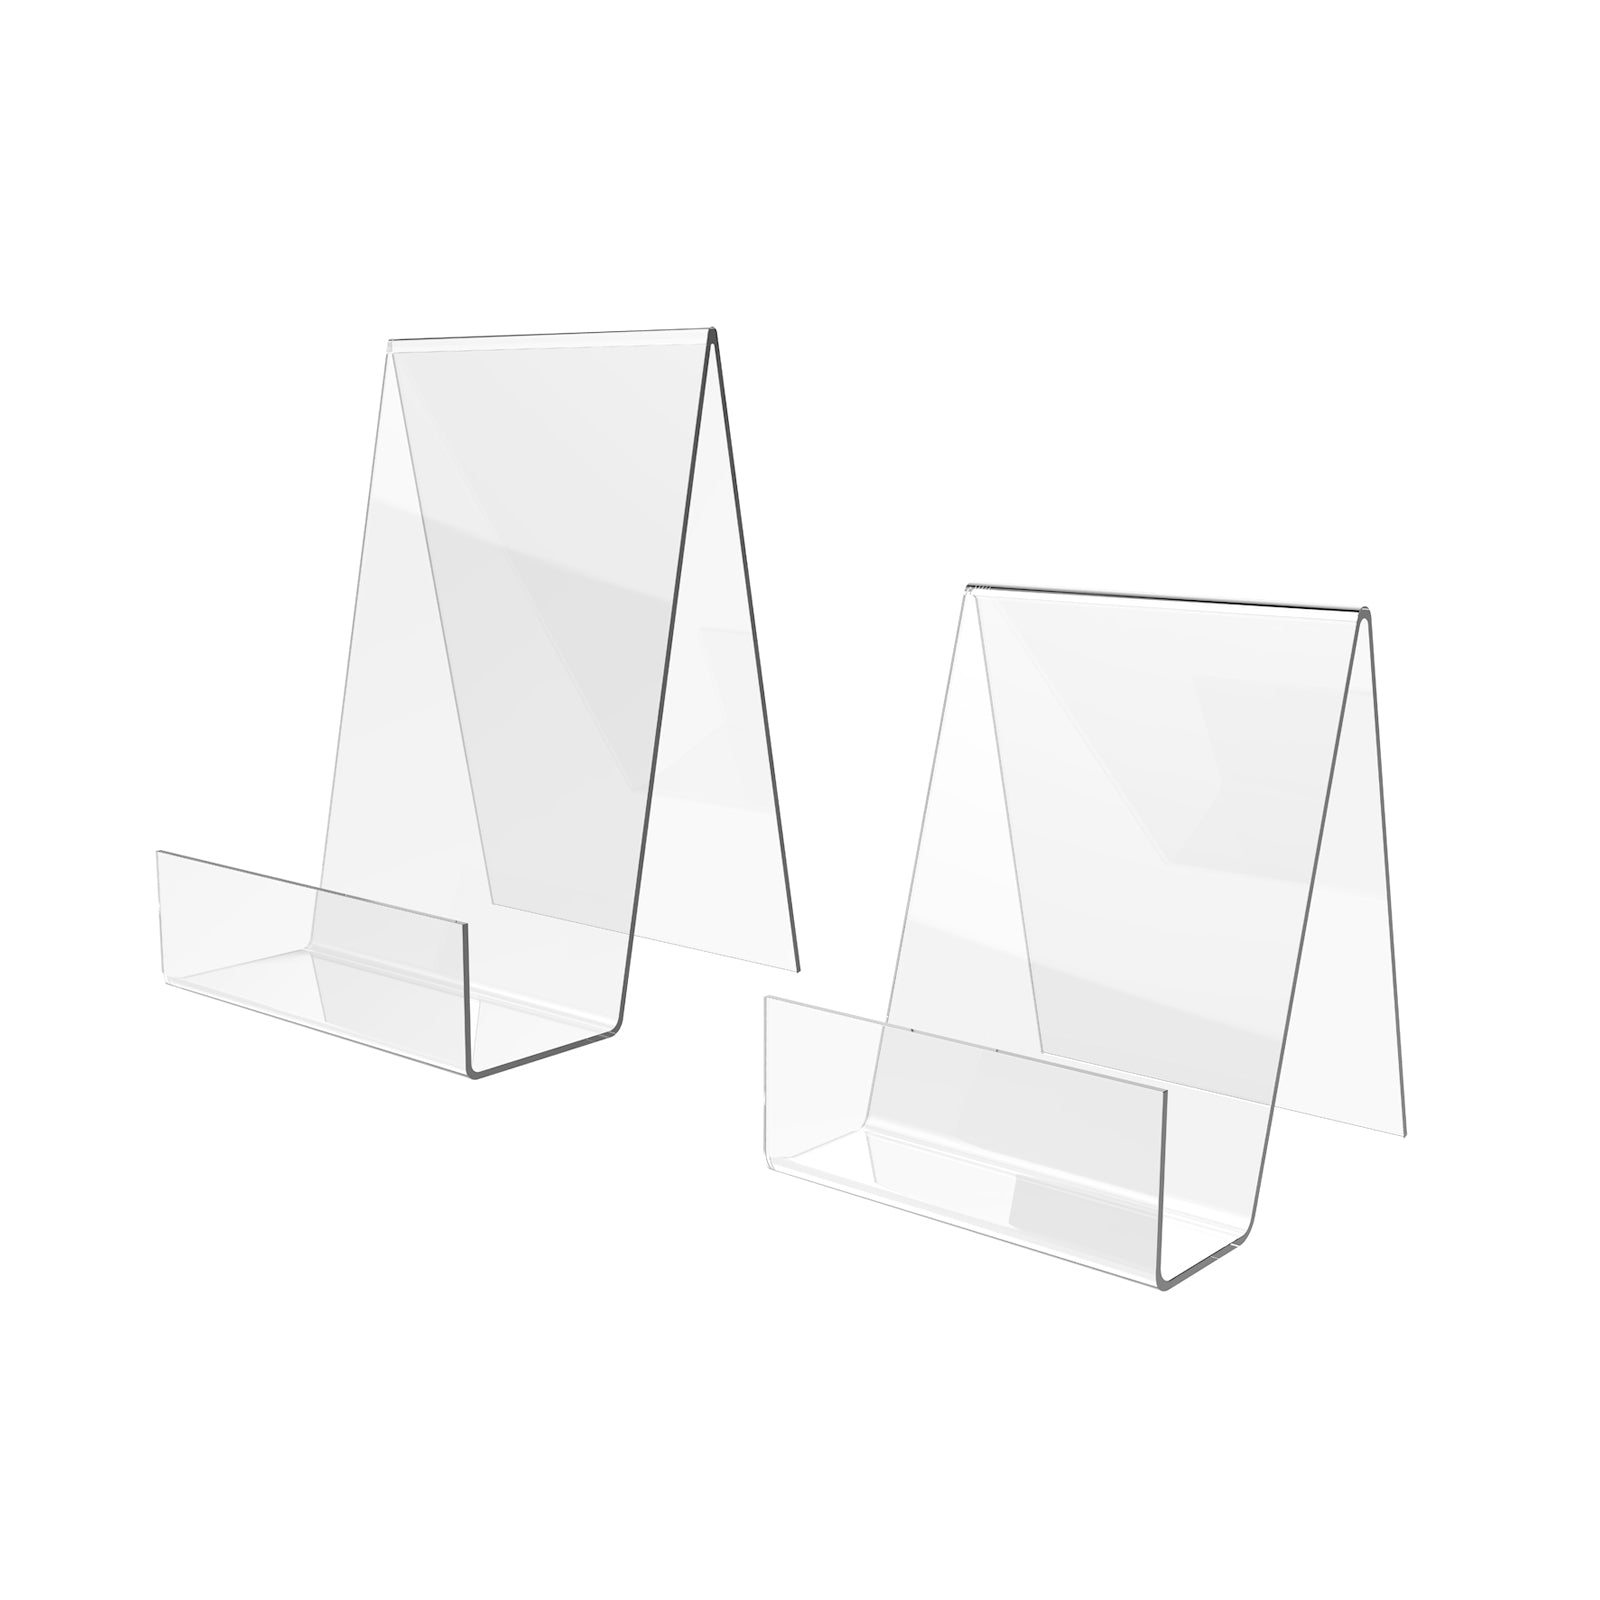 Boloyo Acrylic Book Stand Without Ledge,6 Inch 10PC Clear Acrylic Display  Easel Transparent Display Stand Holder Tablet Holder for Displaying